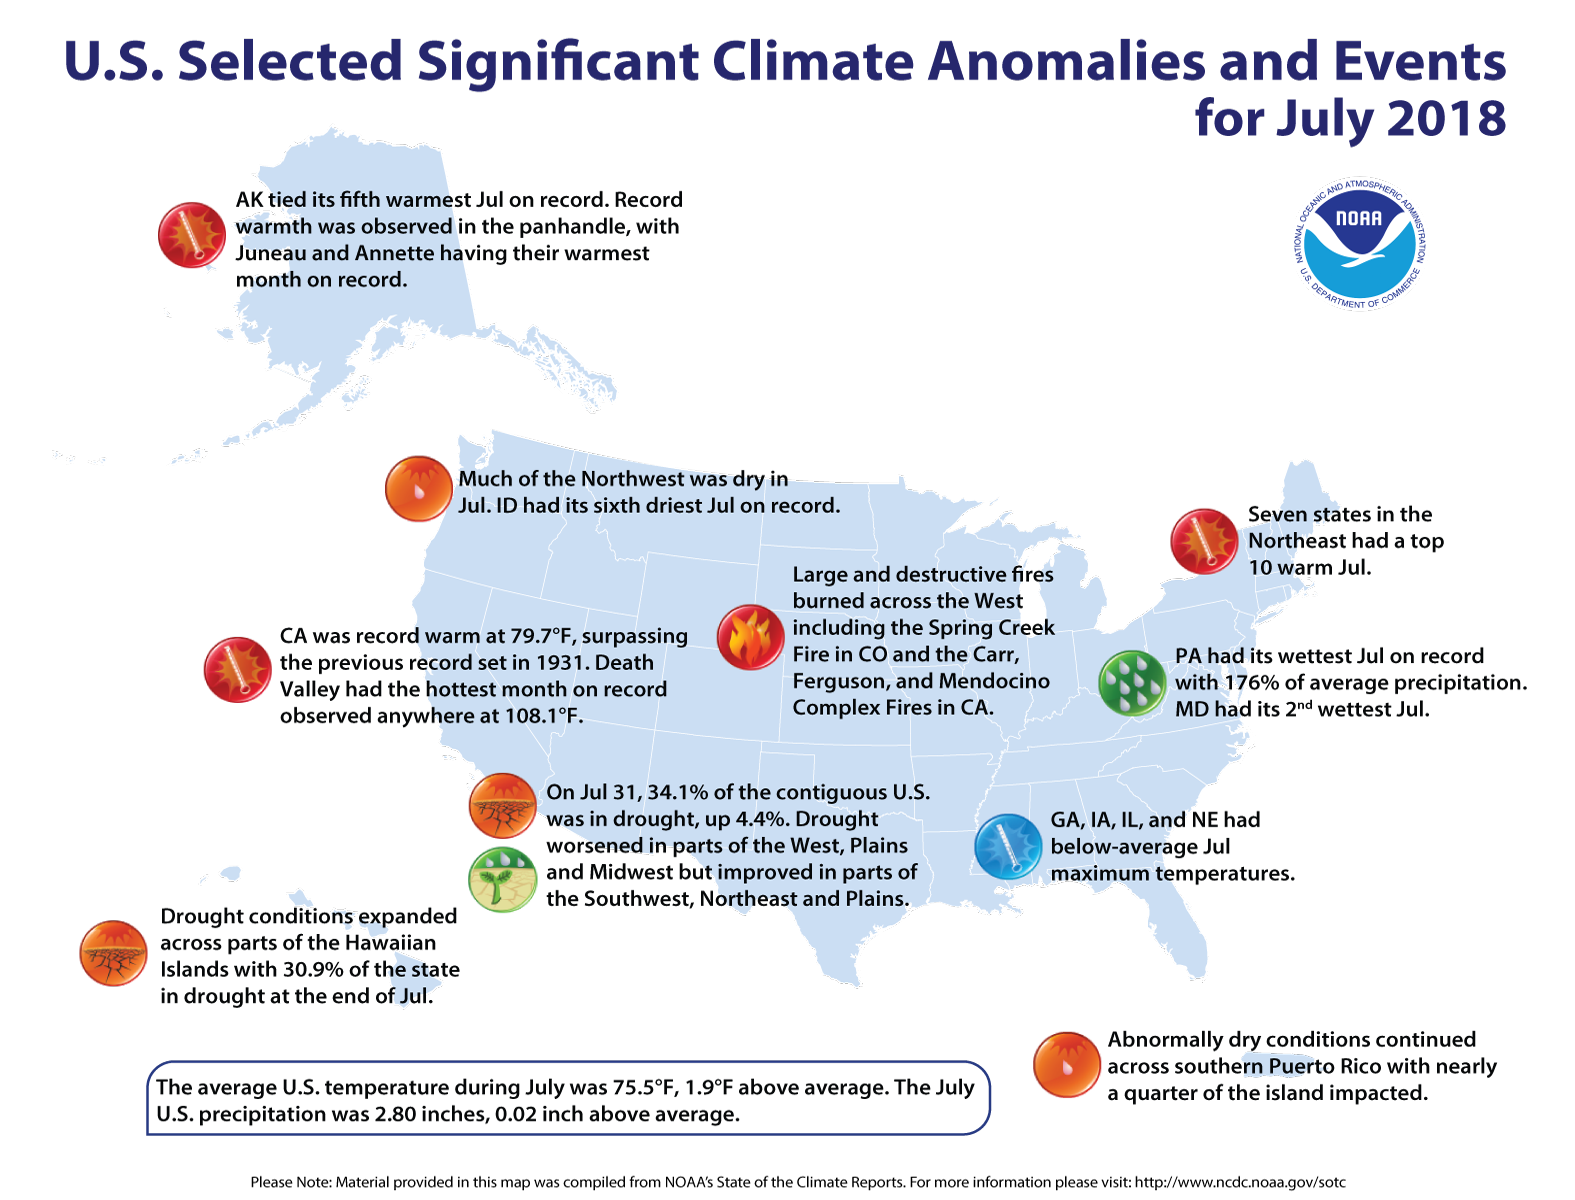 May-July 2018 was the warmest period ever for the US